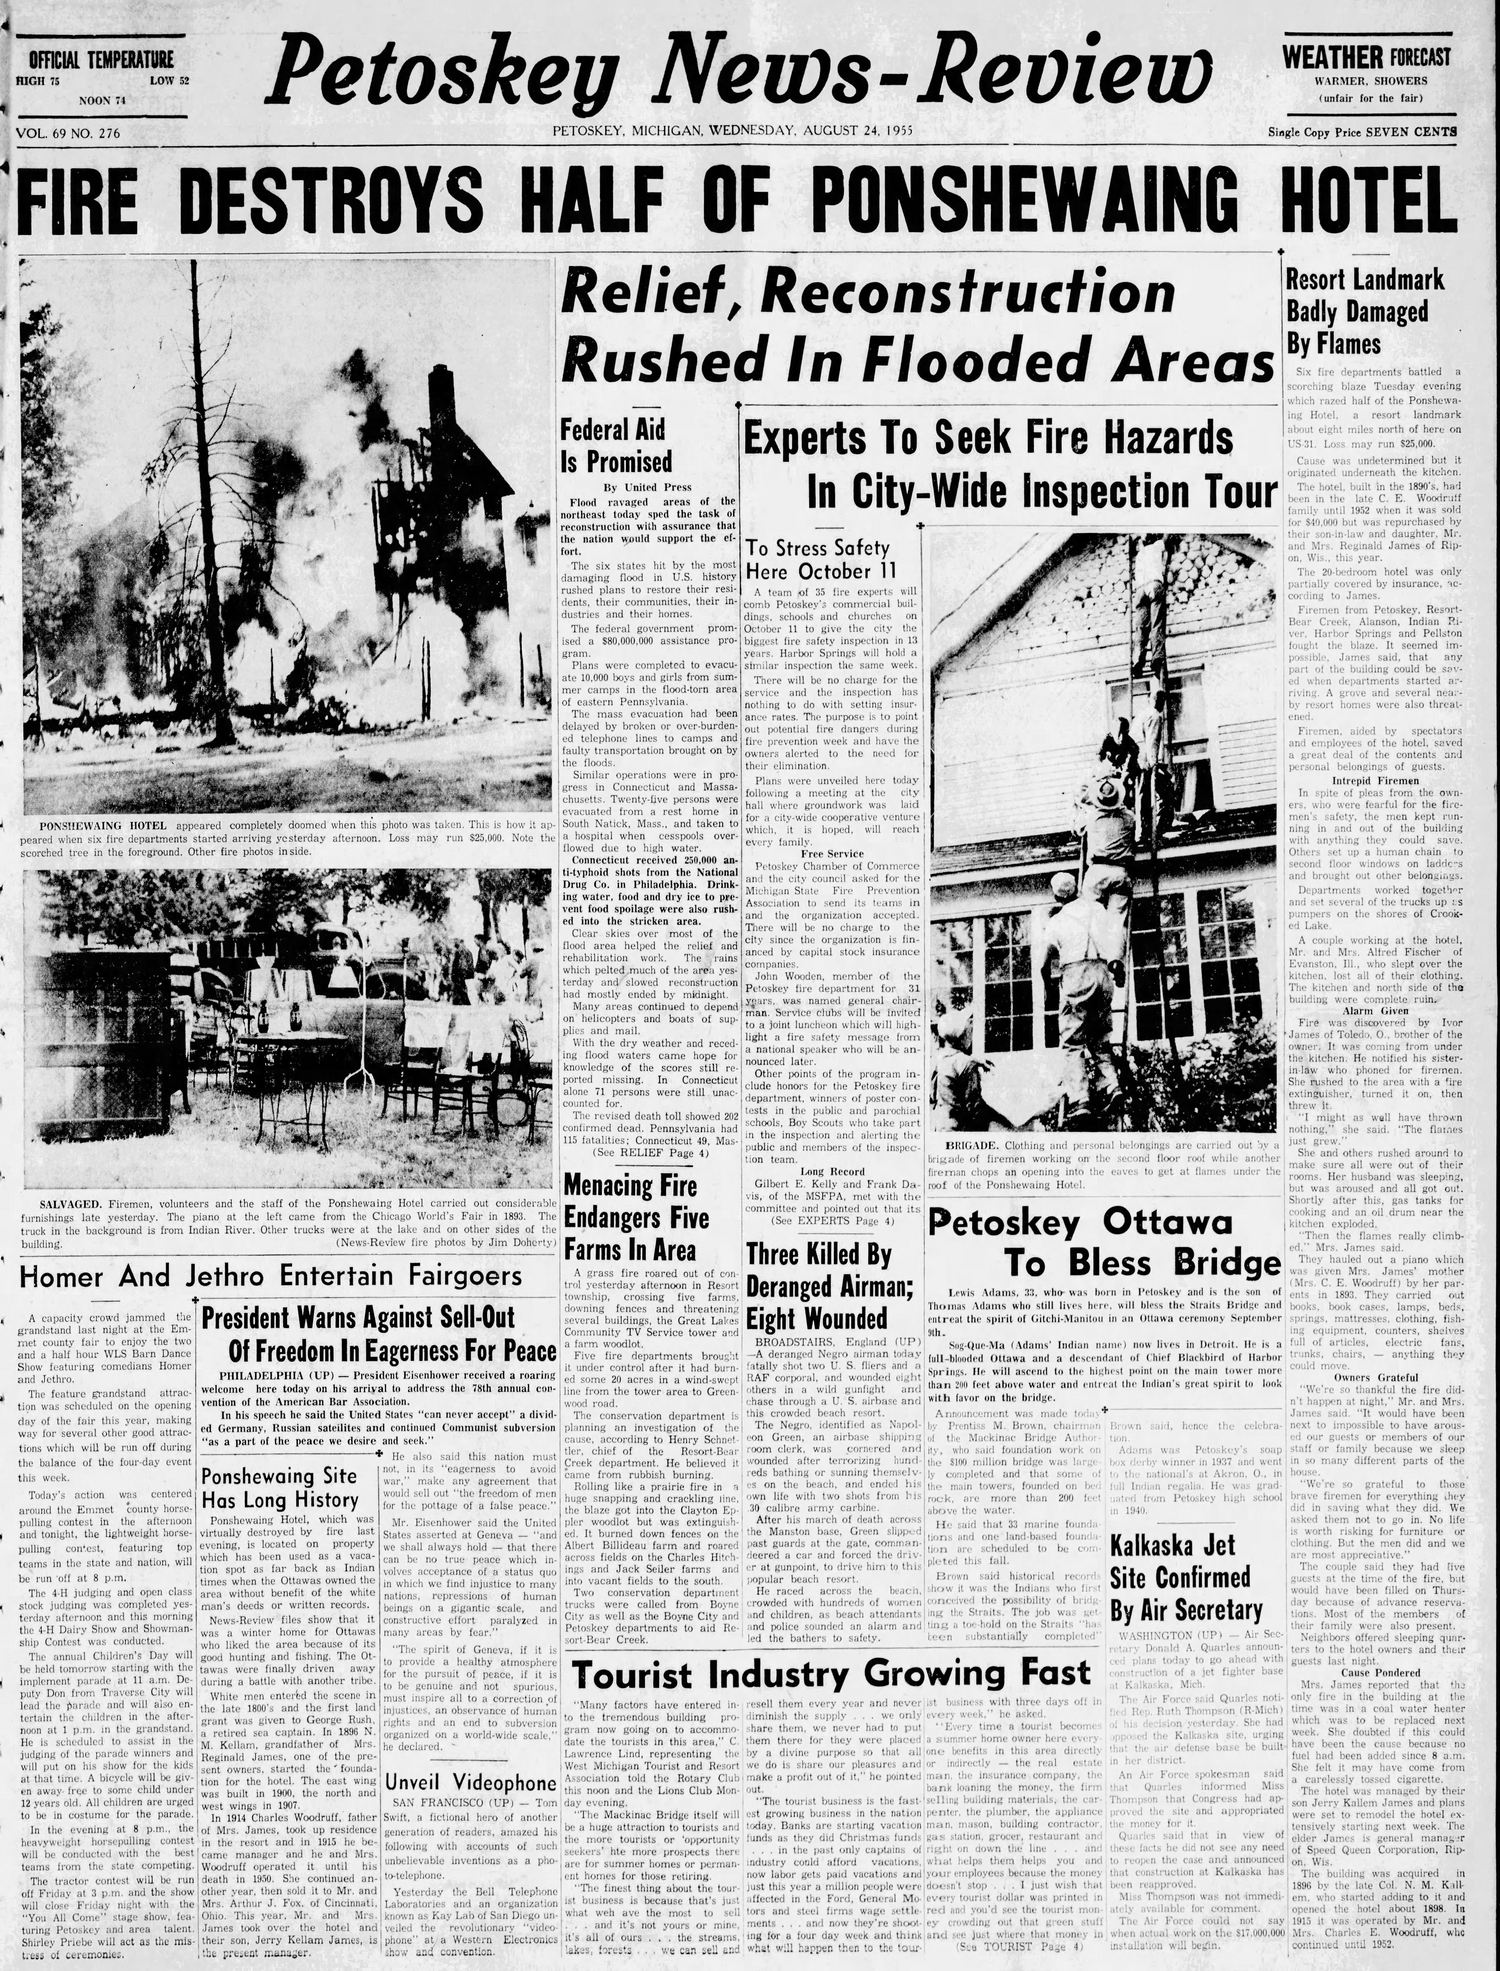 Ponshewaing Hotel - Aug 24 1955 Article On Fire